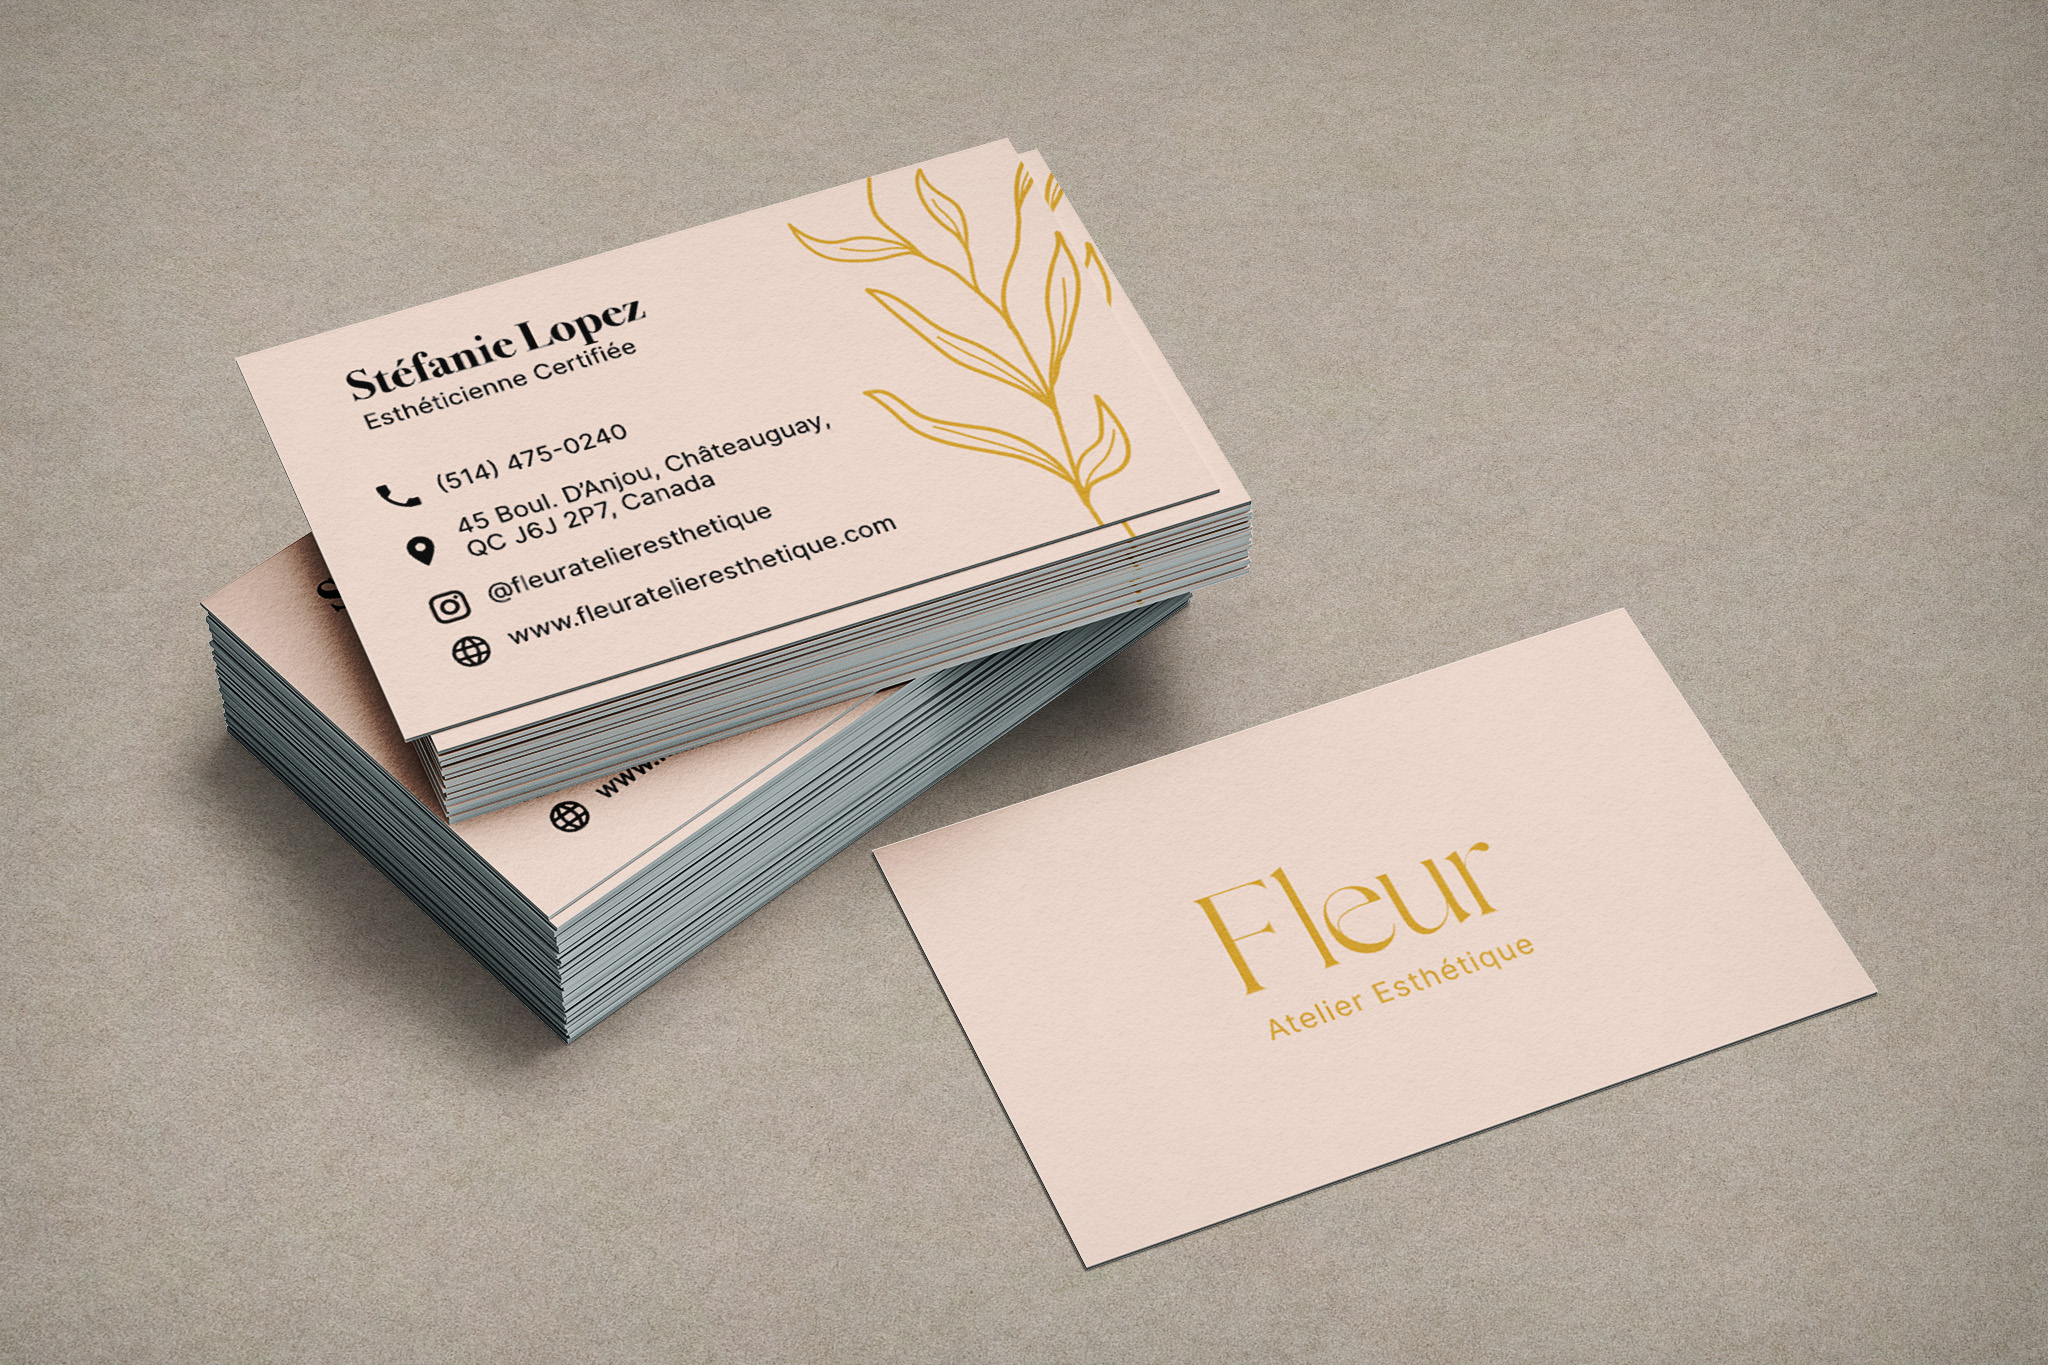 Mockup for a business card with gold leaf stamping and pink background